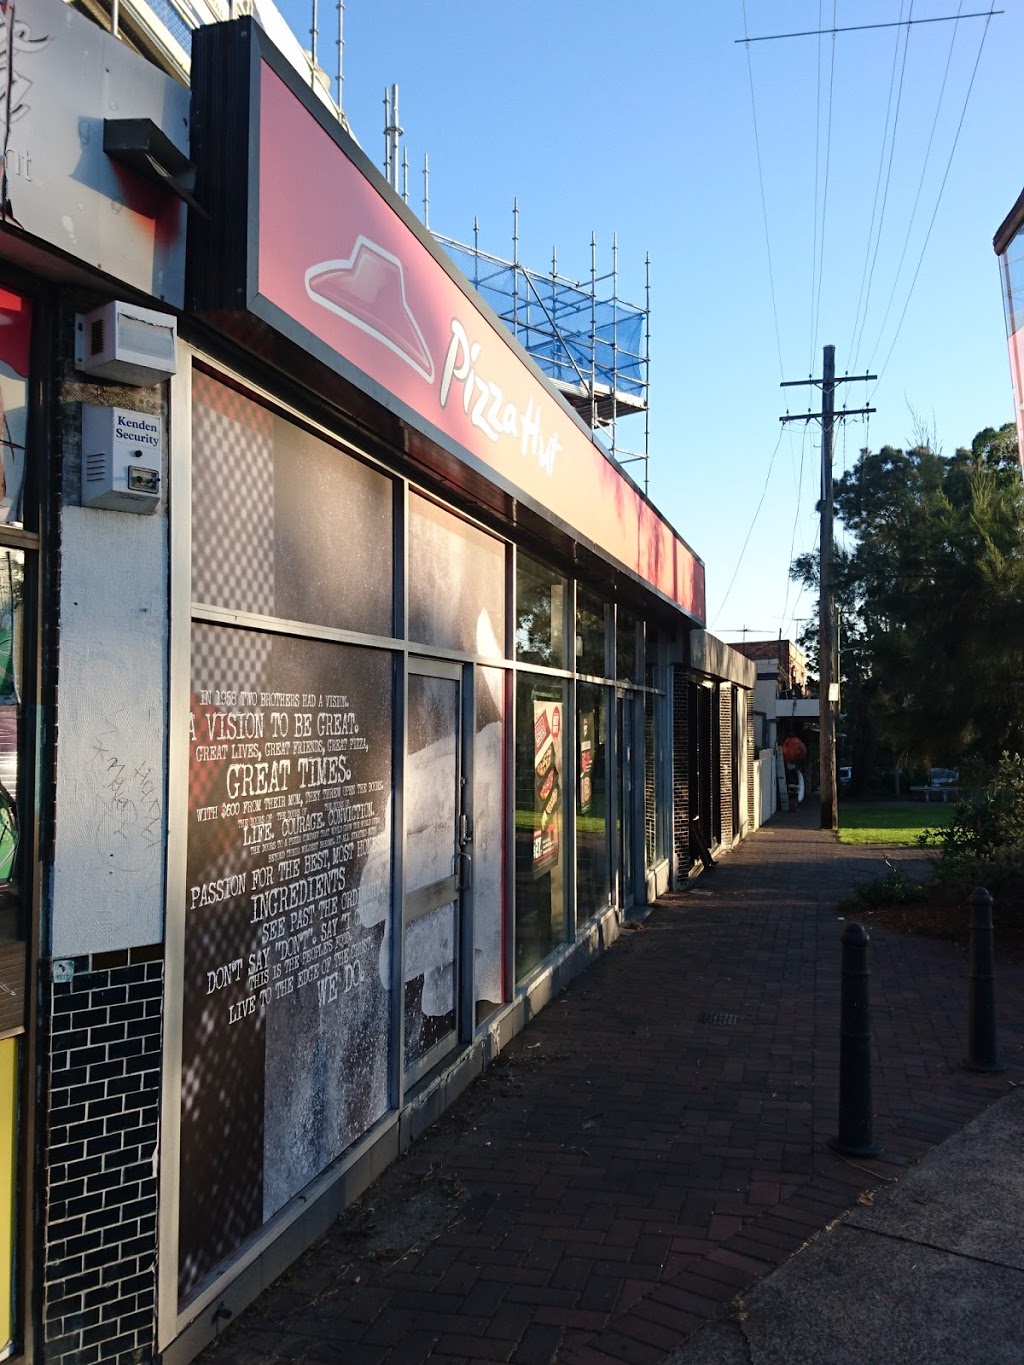 Pizza Hut Lilyfield | meal delivery | Shop 2/3, 331 Balmain Rd, Lilyfield NSW 2040, Australia | 131166 OR +61 131166